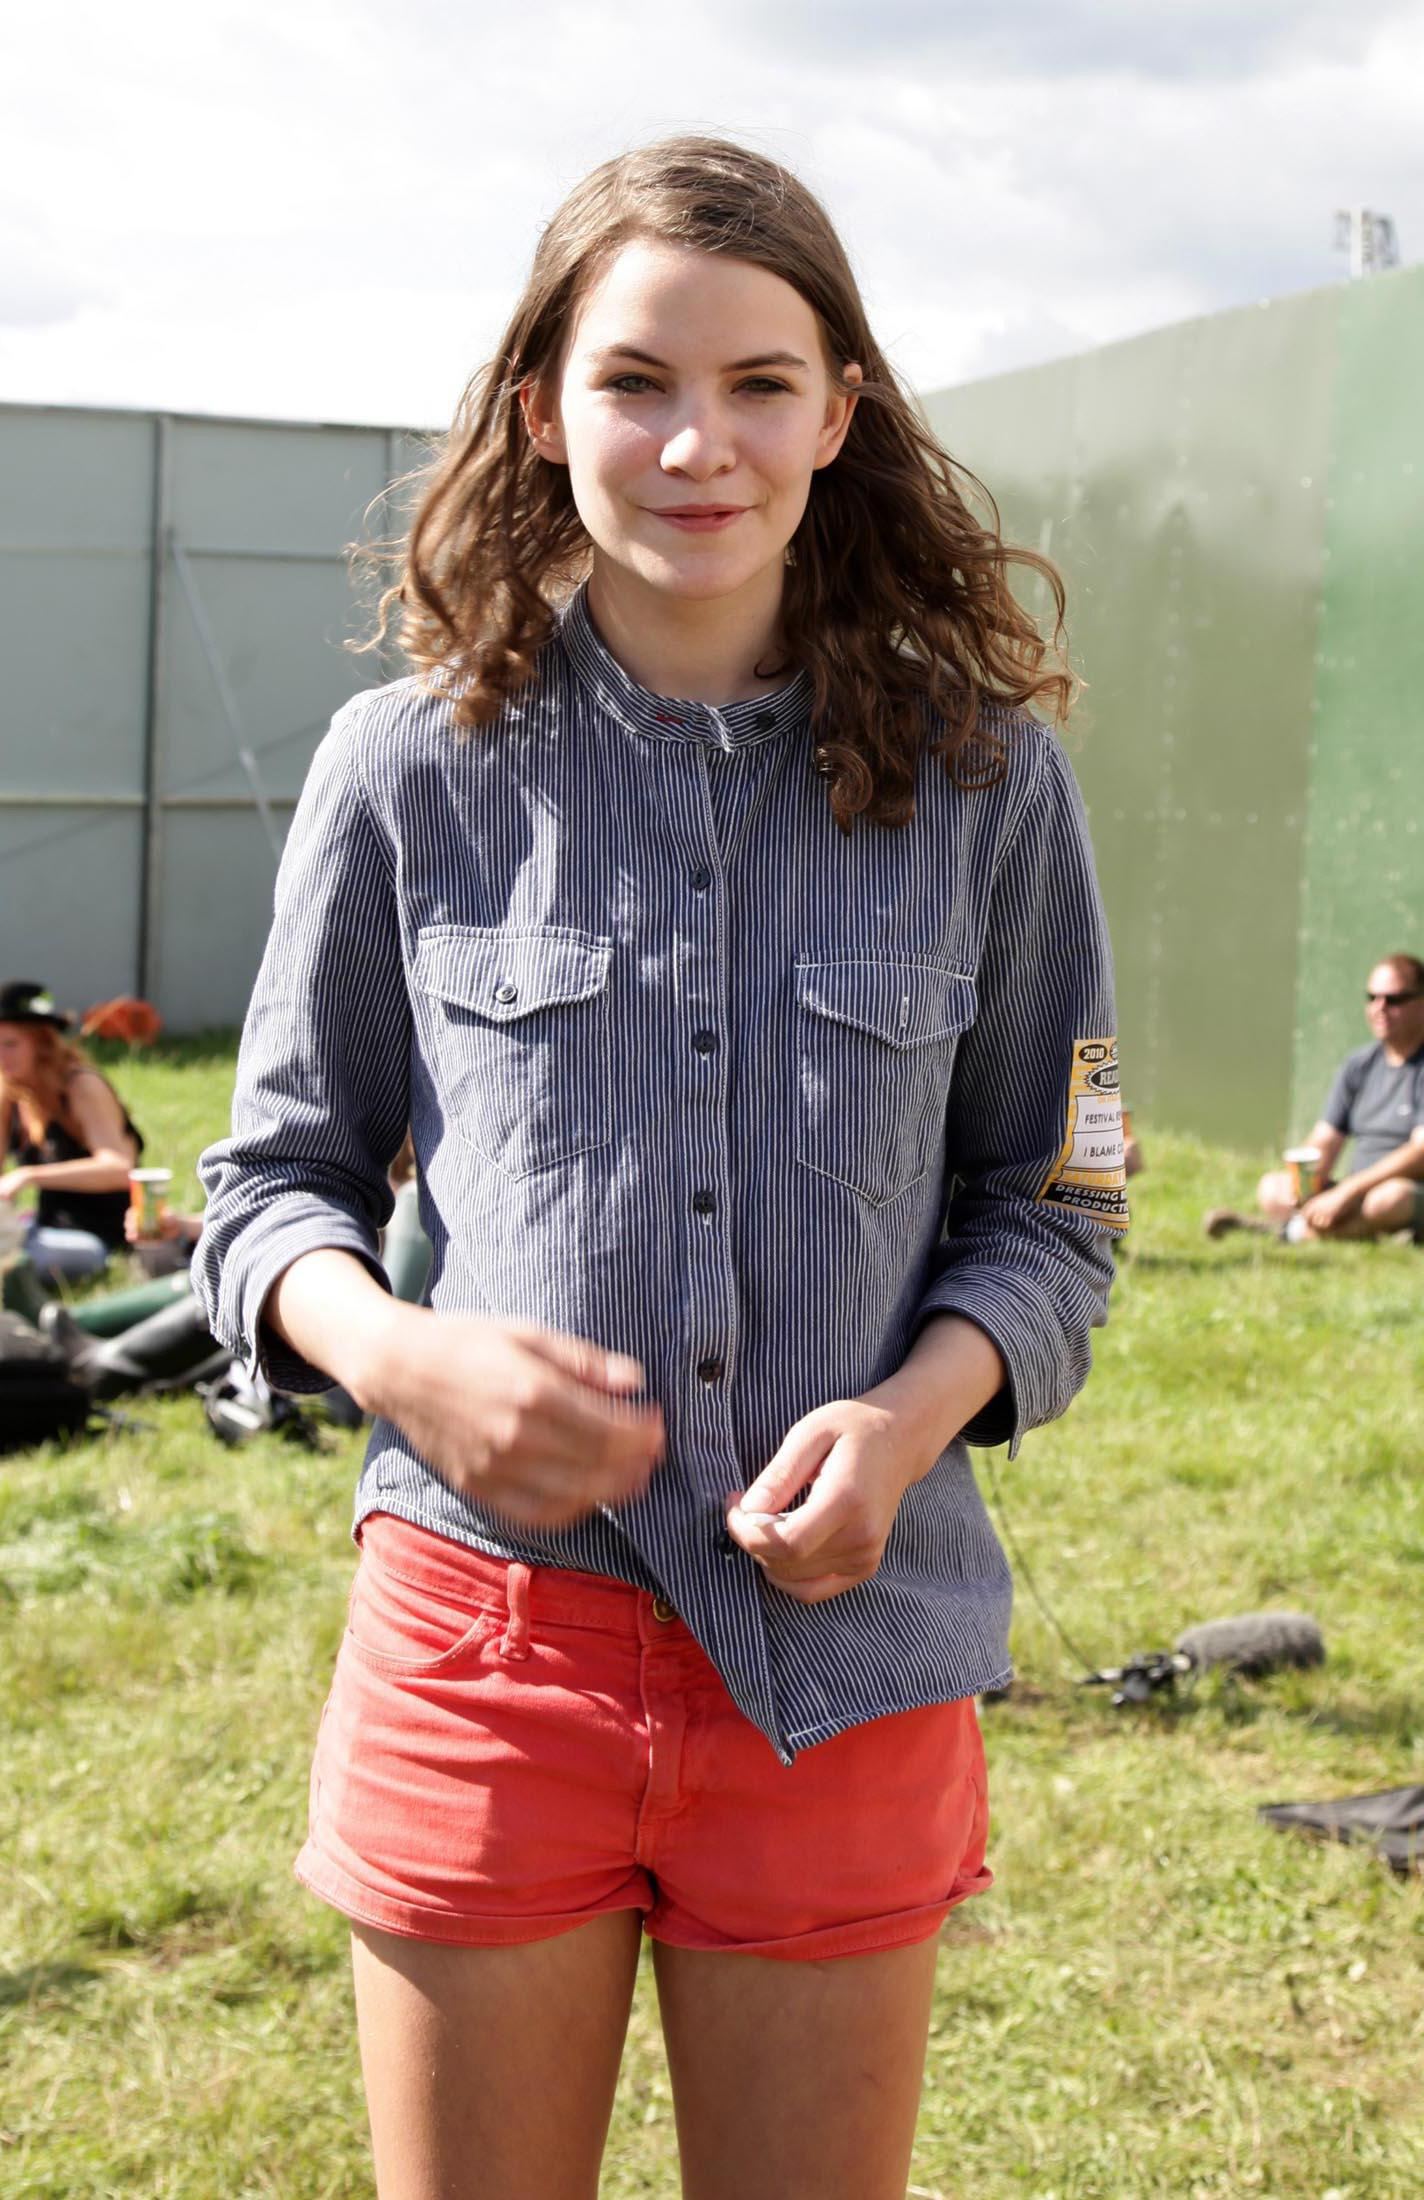 Eliot Sumner on August 28, 2010 | Source: Getty Images